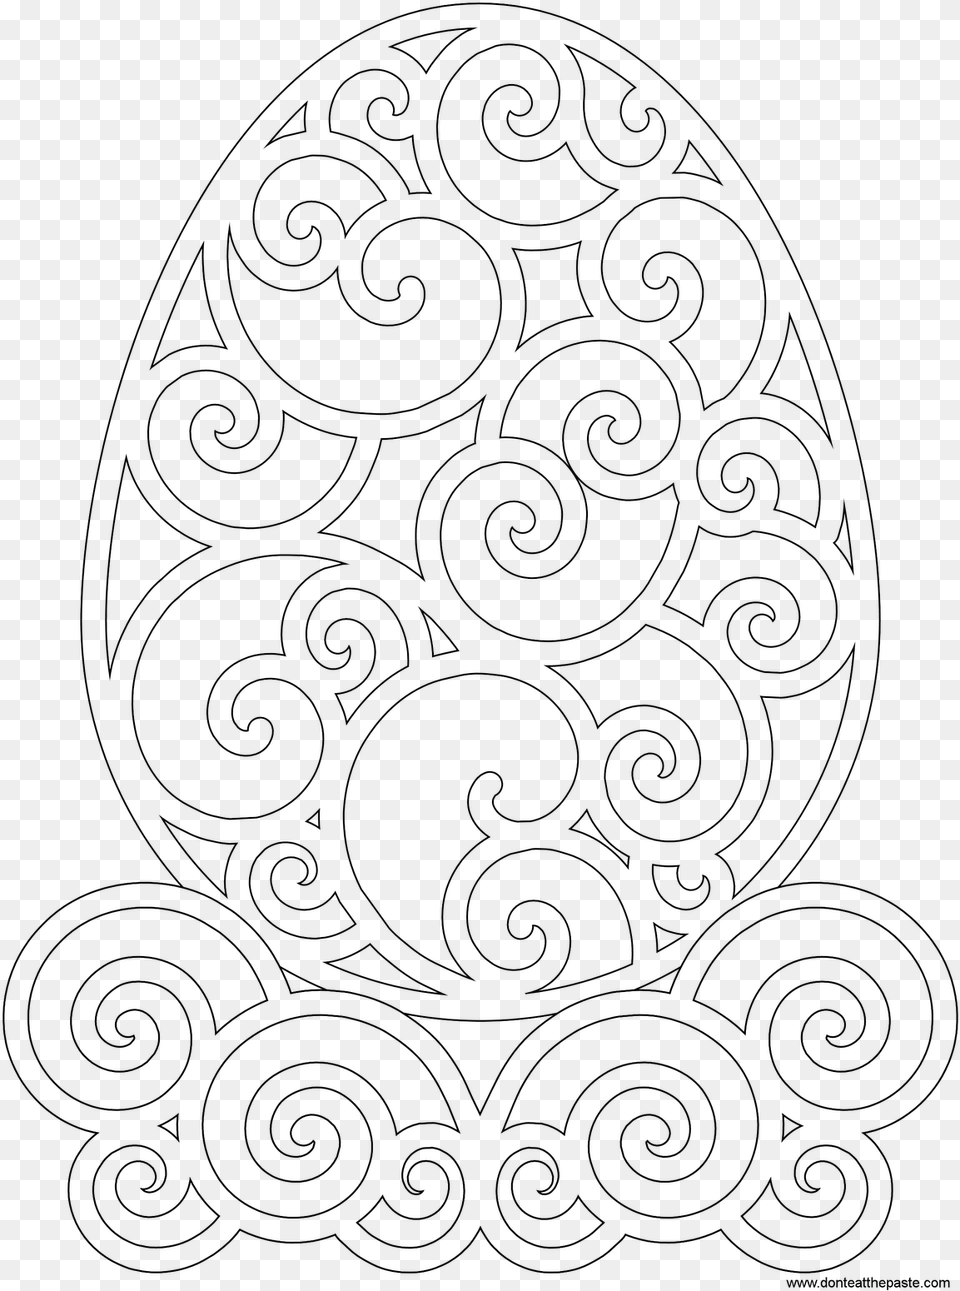 Advanced Coloring Pages Swirls Wielkanocny Witra Szablon, Gray Free Png Download